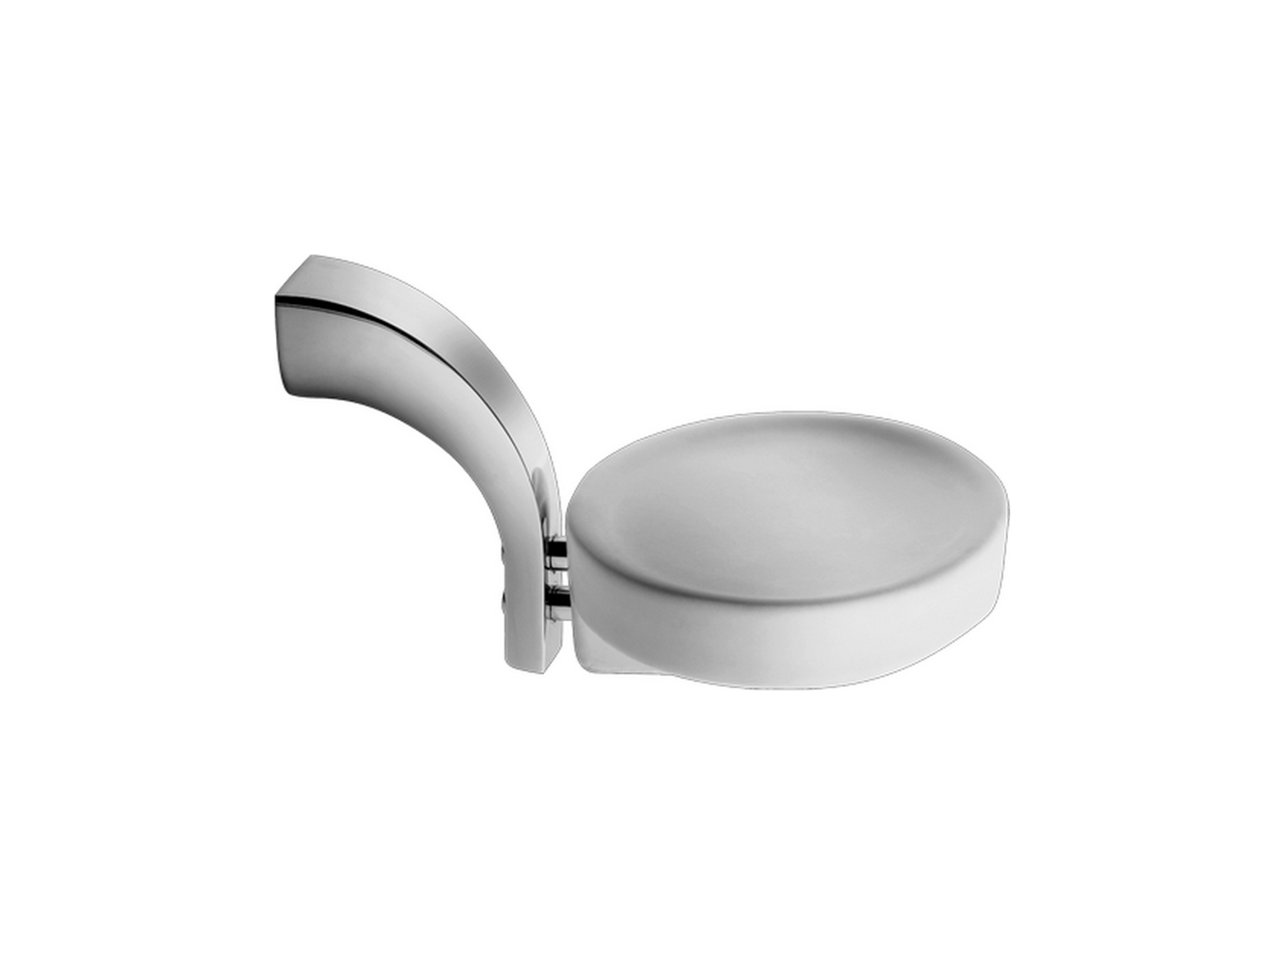 Wall mounted soap-dish BATHROOM ACCESSORIES_AE090600 - v1